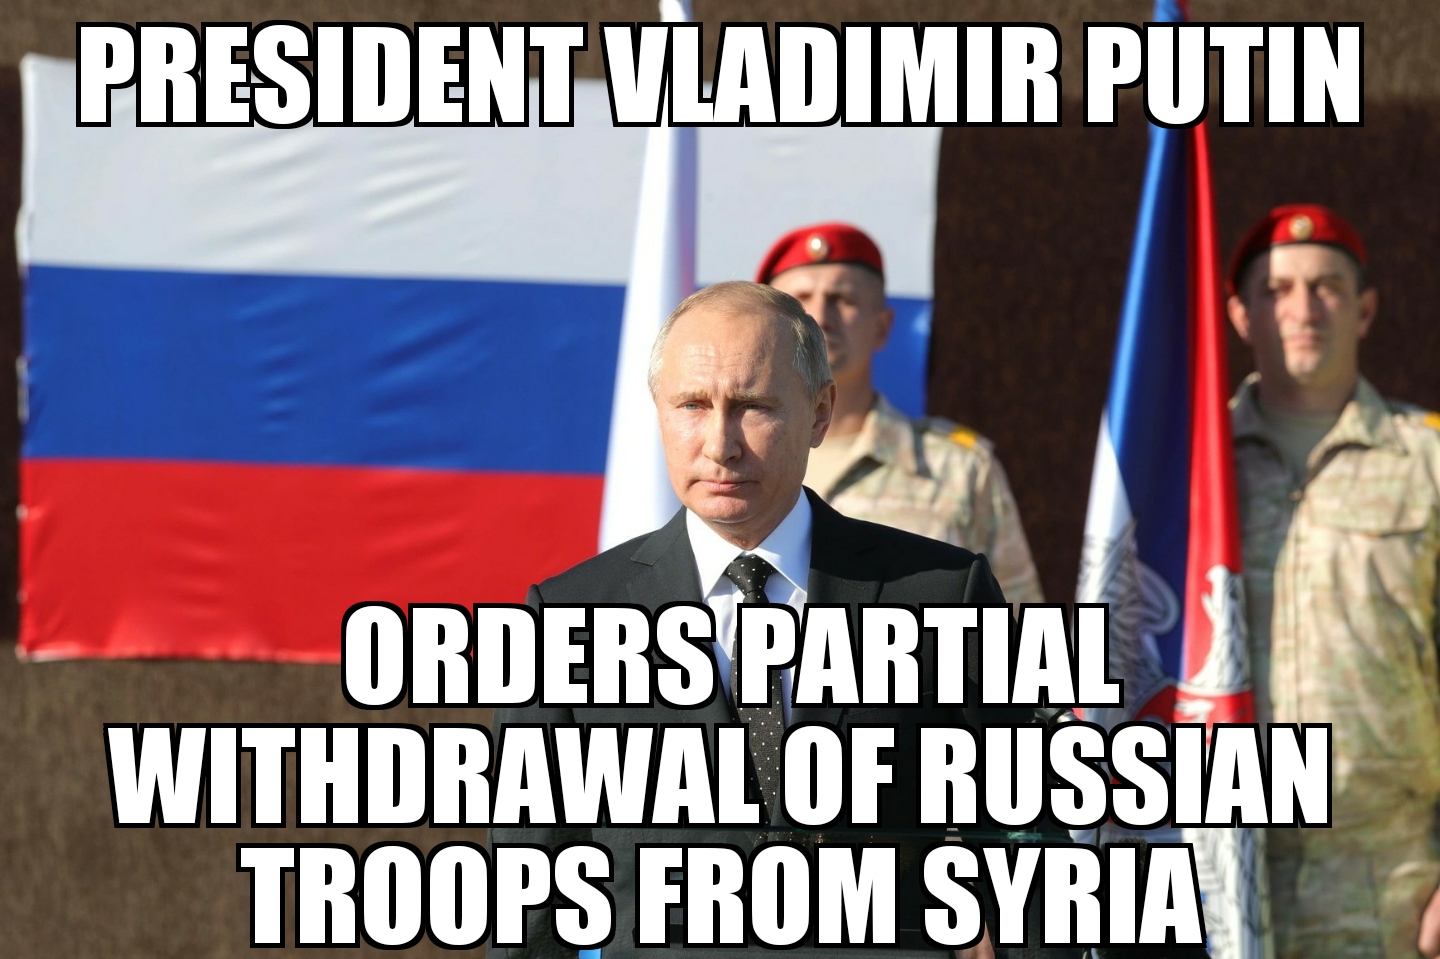 Putin orders partial withdrawal of troops from Syria